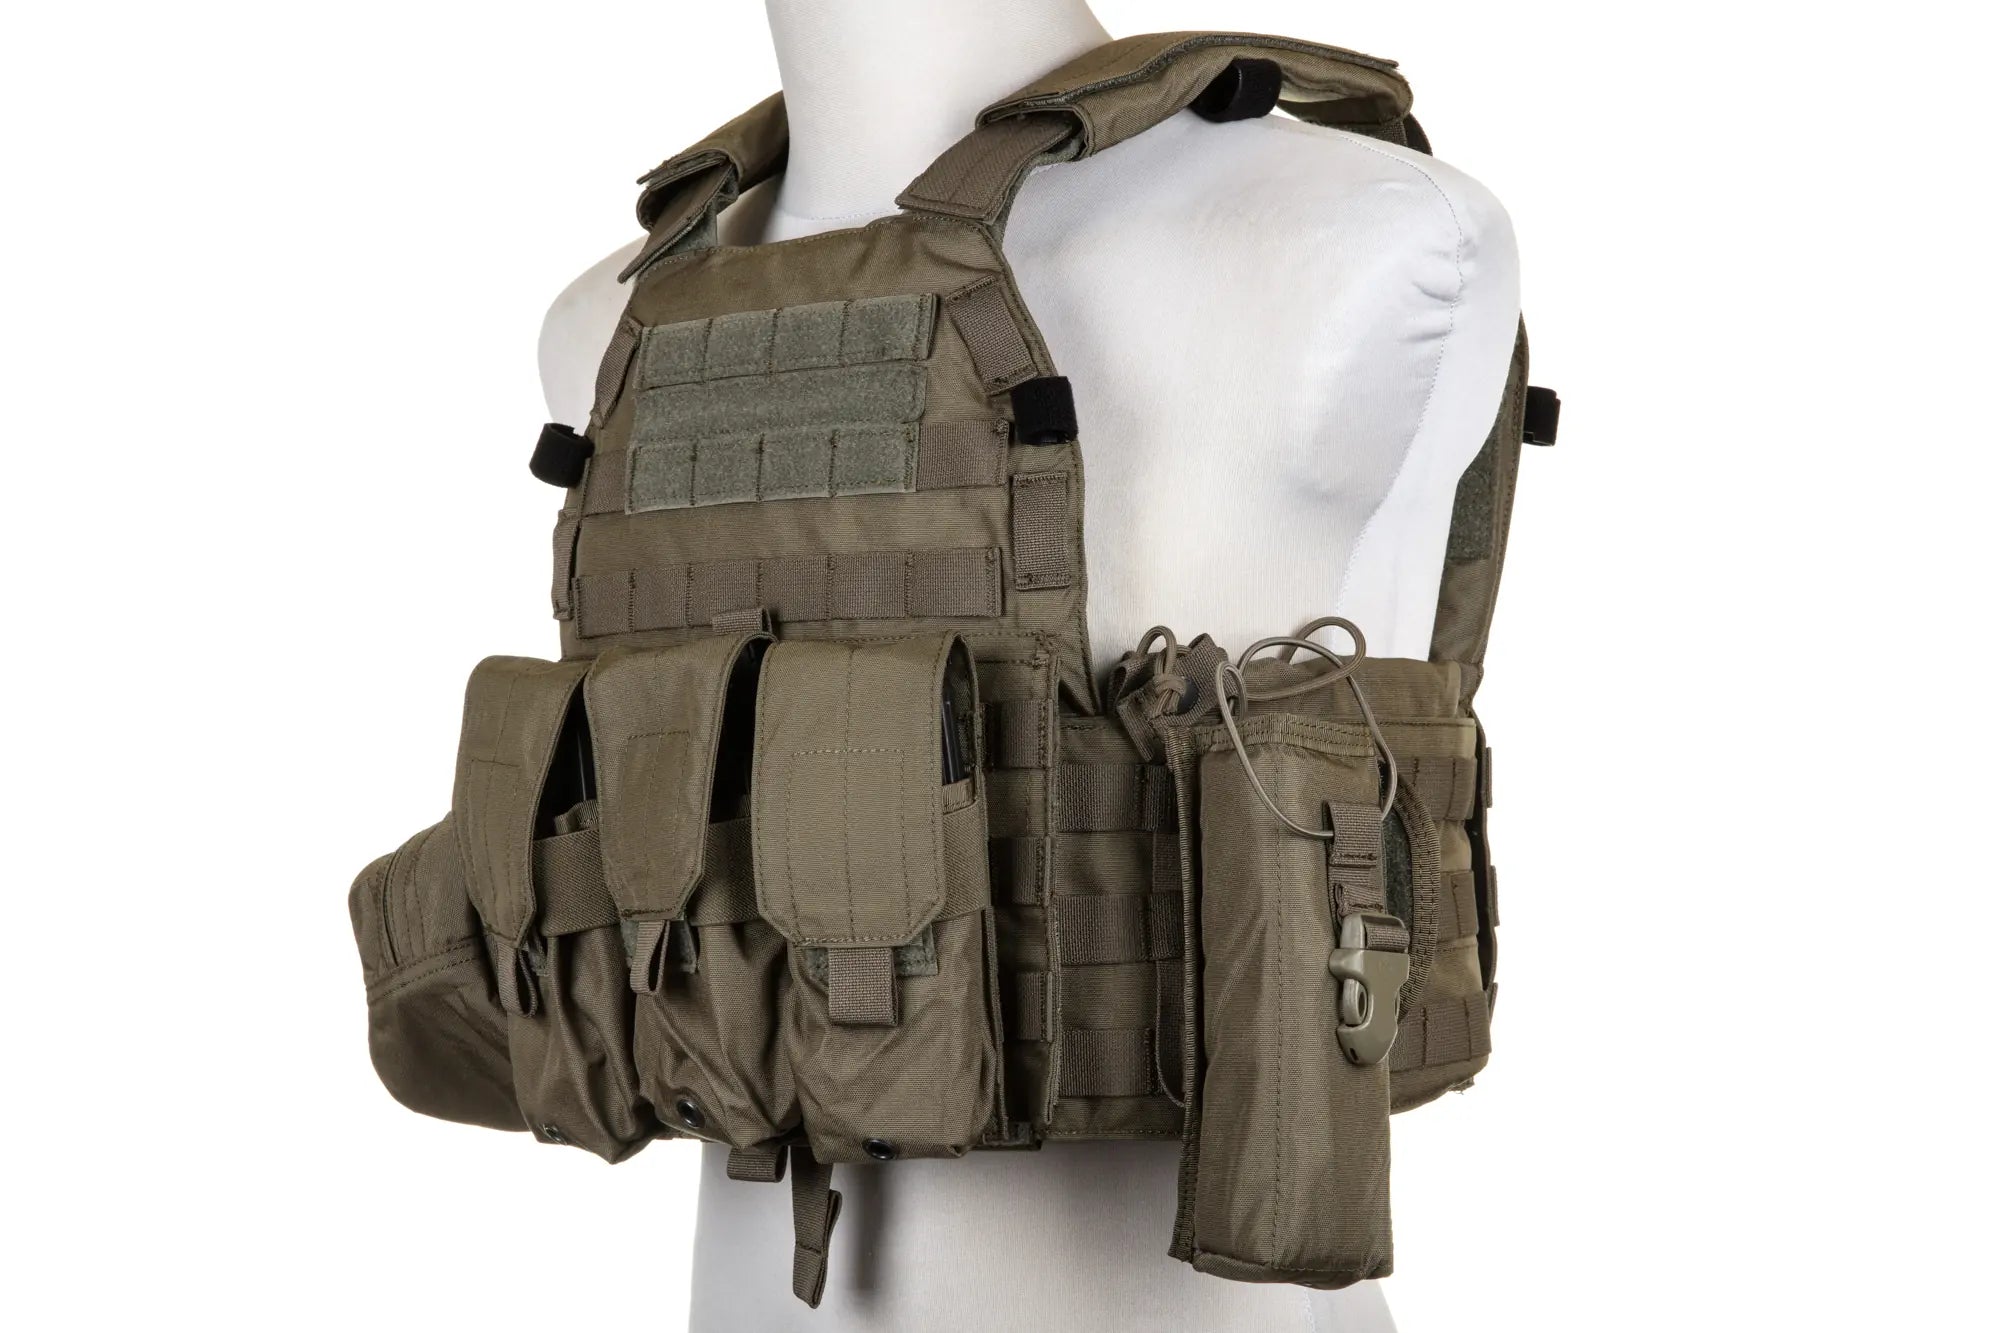 Emerson Gear 6094A Style Plate Carrier waistcoat with Ranger Green cargo kit-1